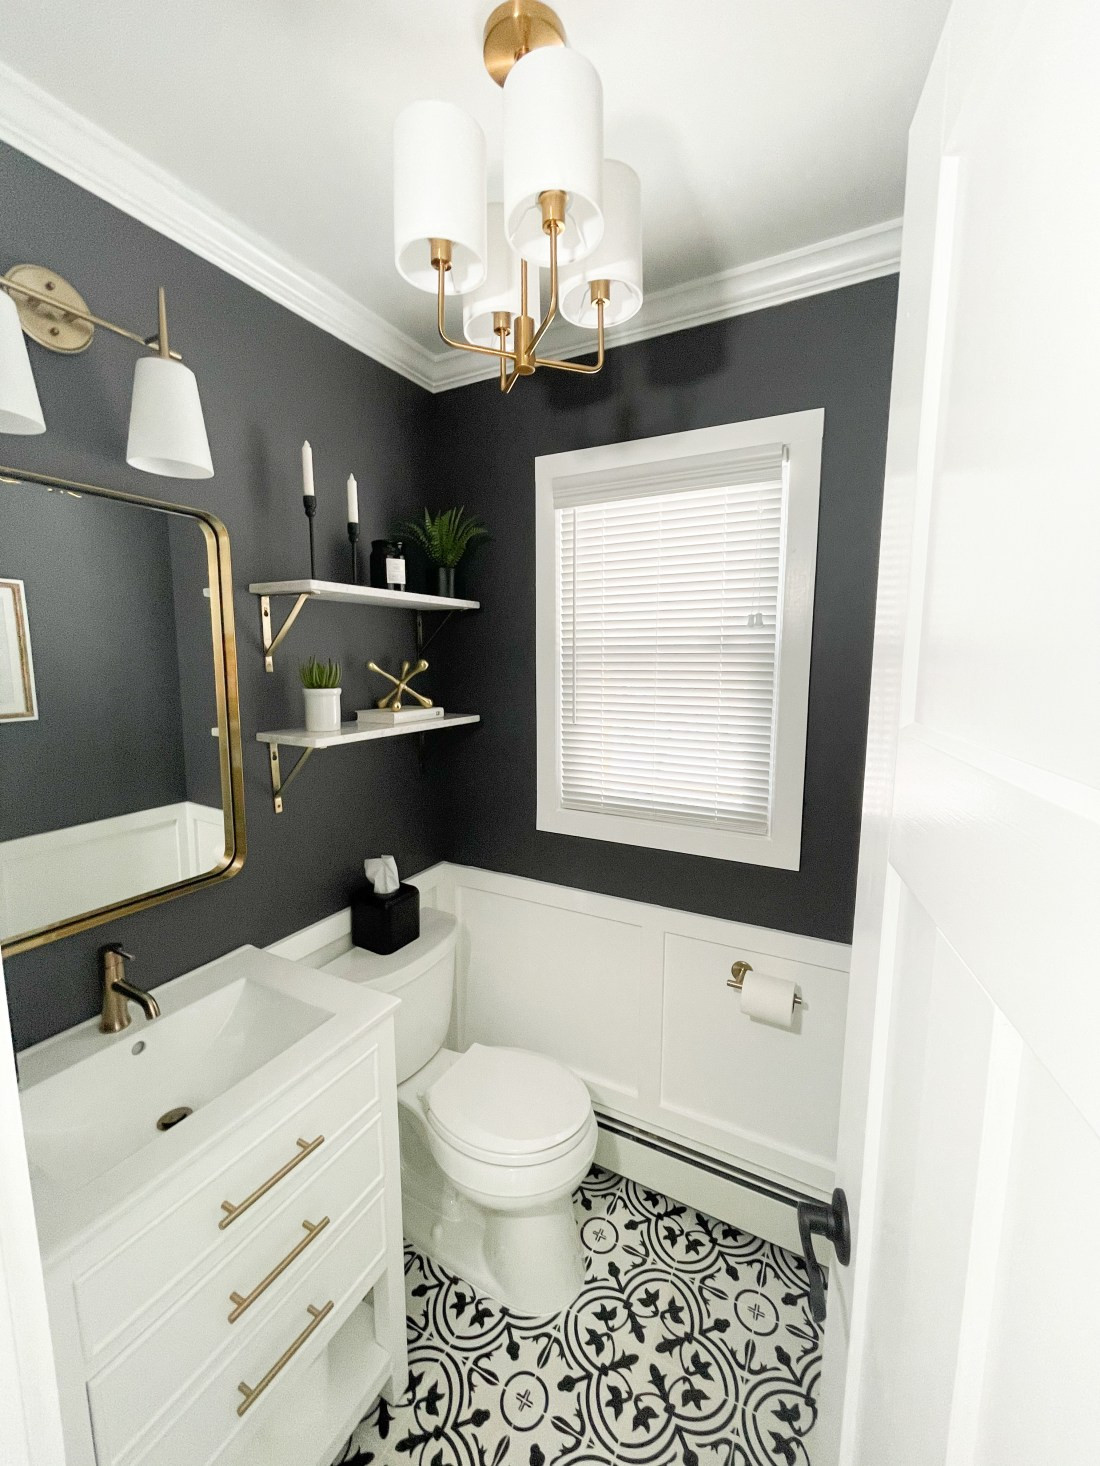 Before & After- Our Bathroom Transformation - pretty little social